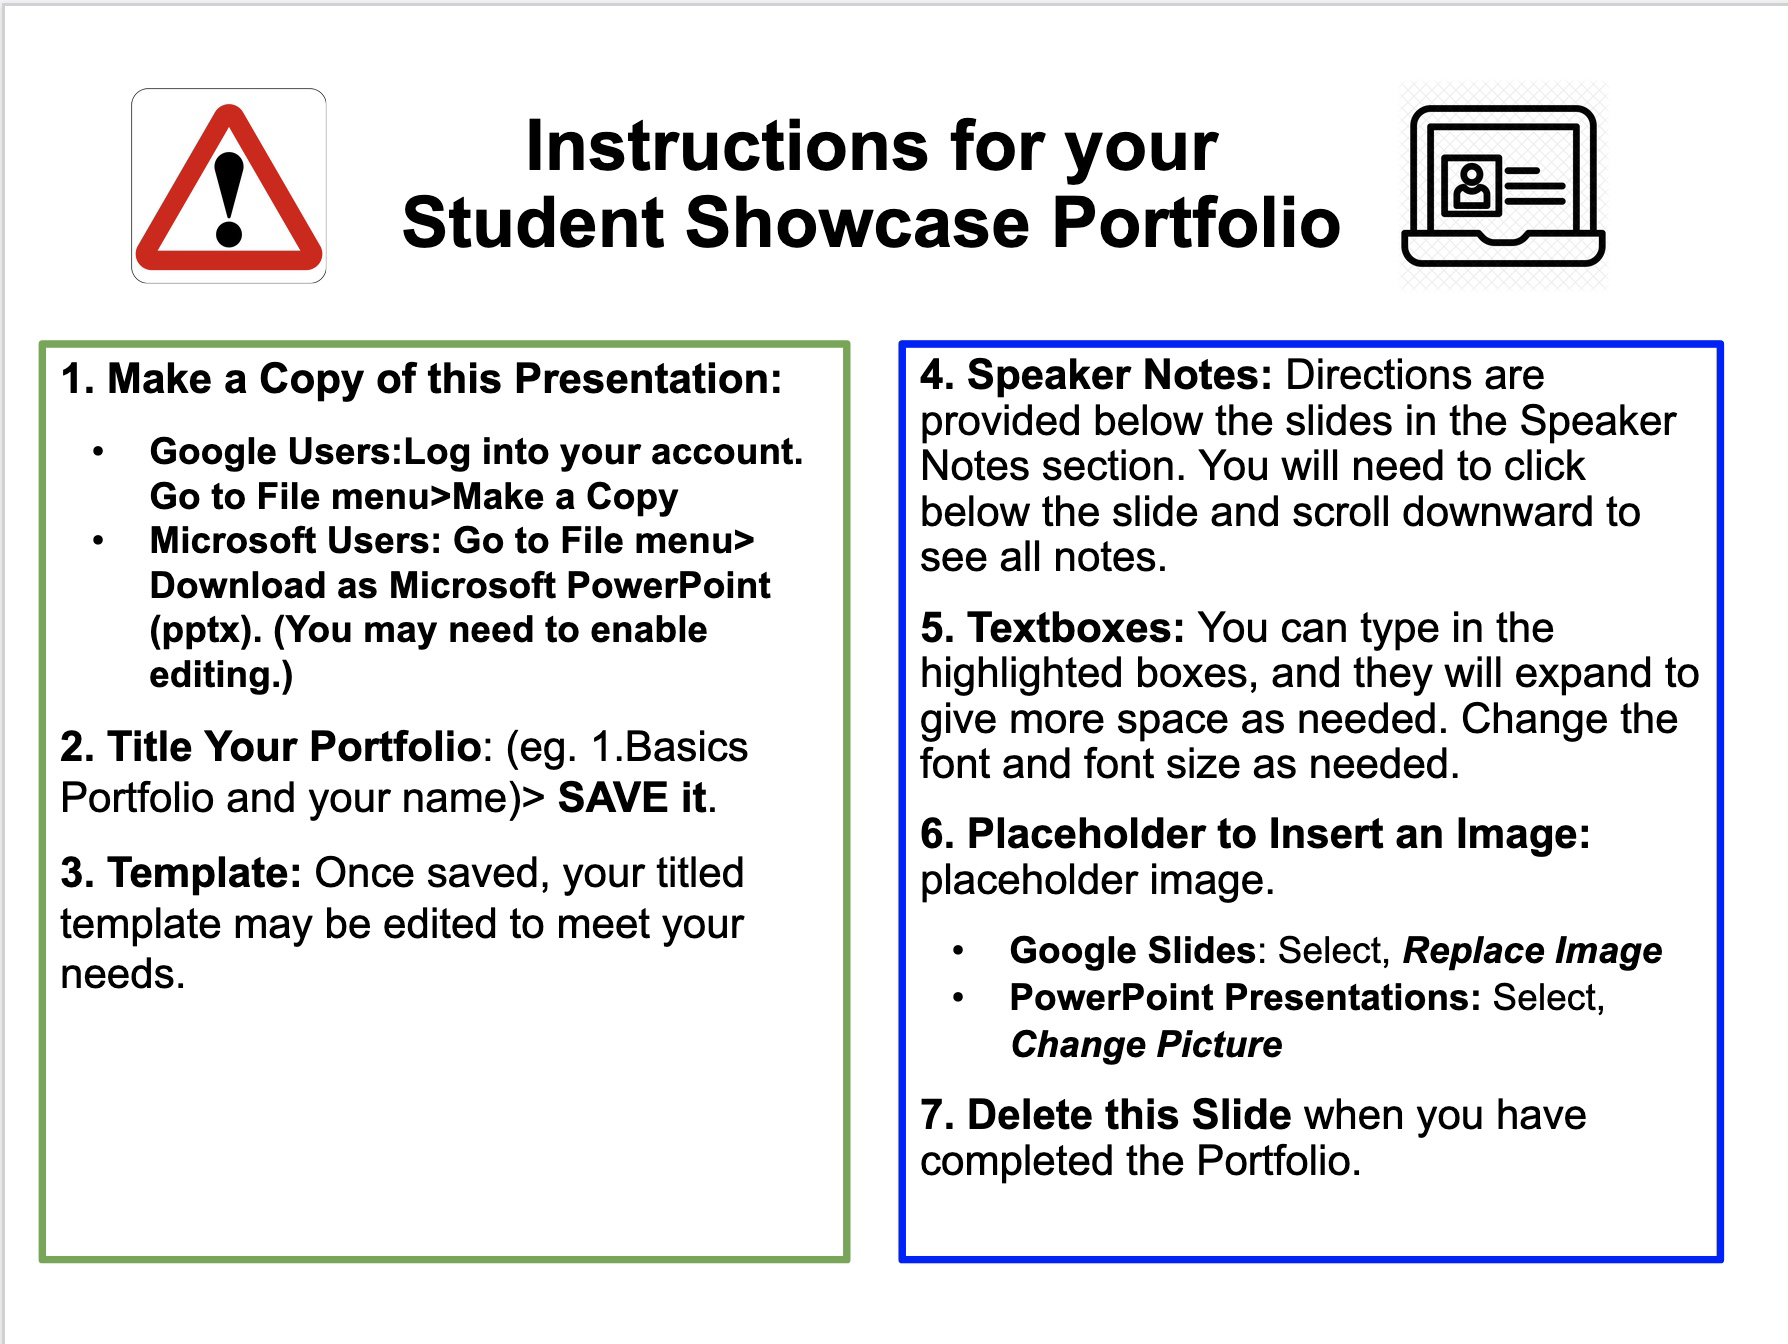 Screenshot of the Slide 1 instructions for the Student Showcase Portfolio Template.